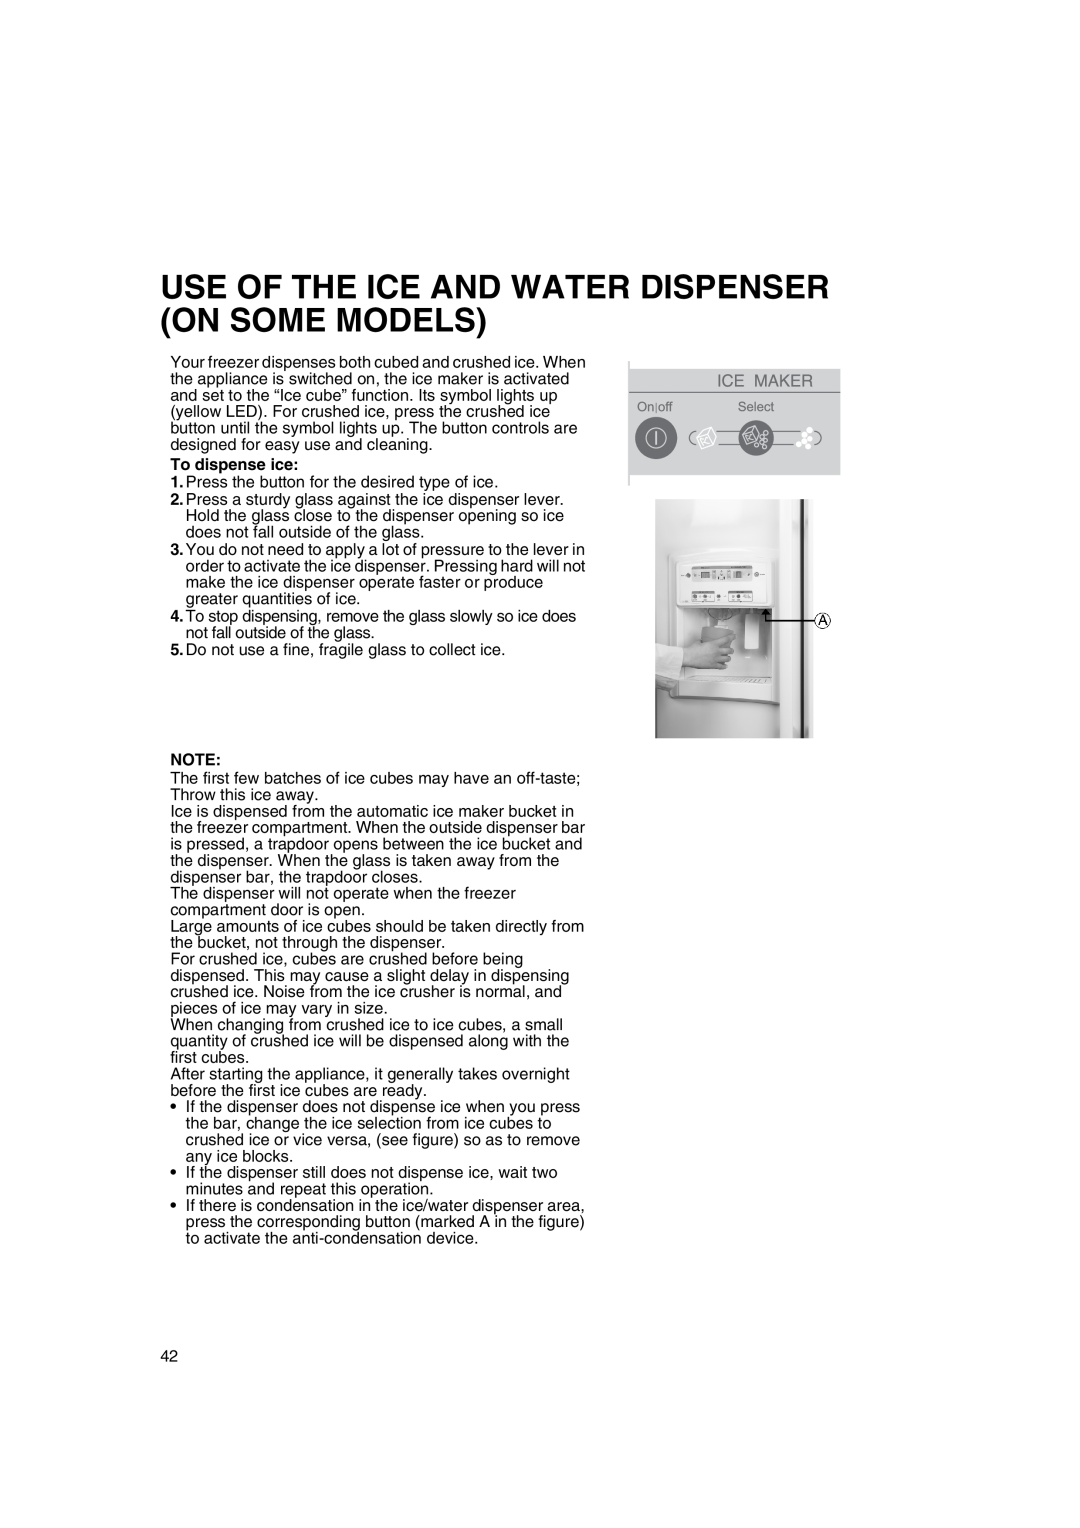 Smeg FA550XBI manual Use Of The Ice And Water Dispenser On Some Models, To dispense ice 